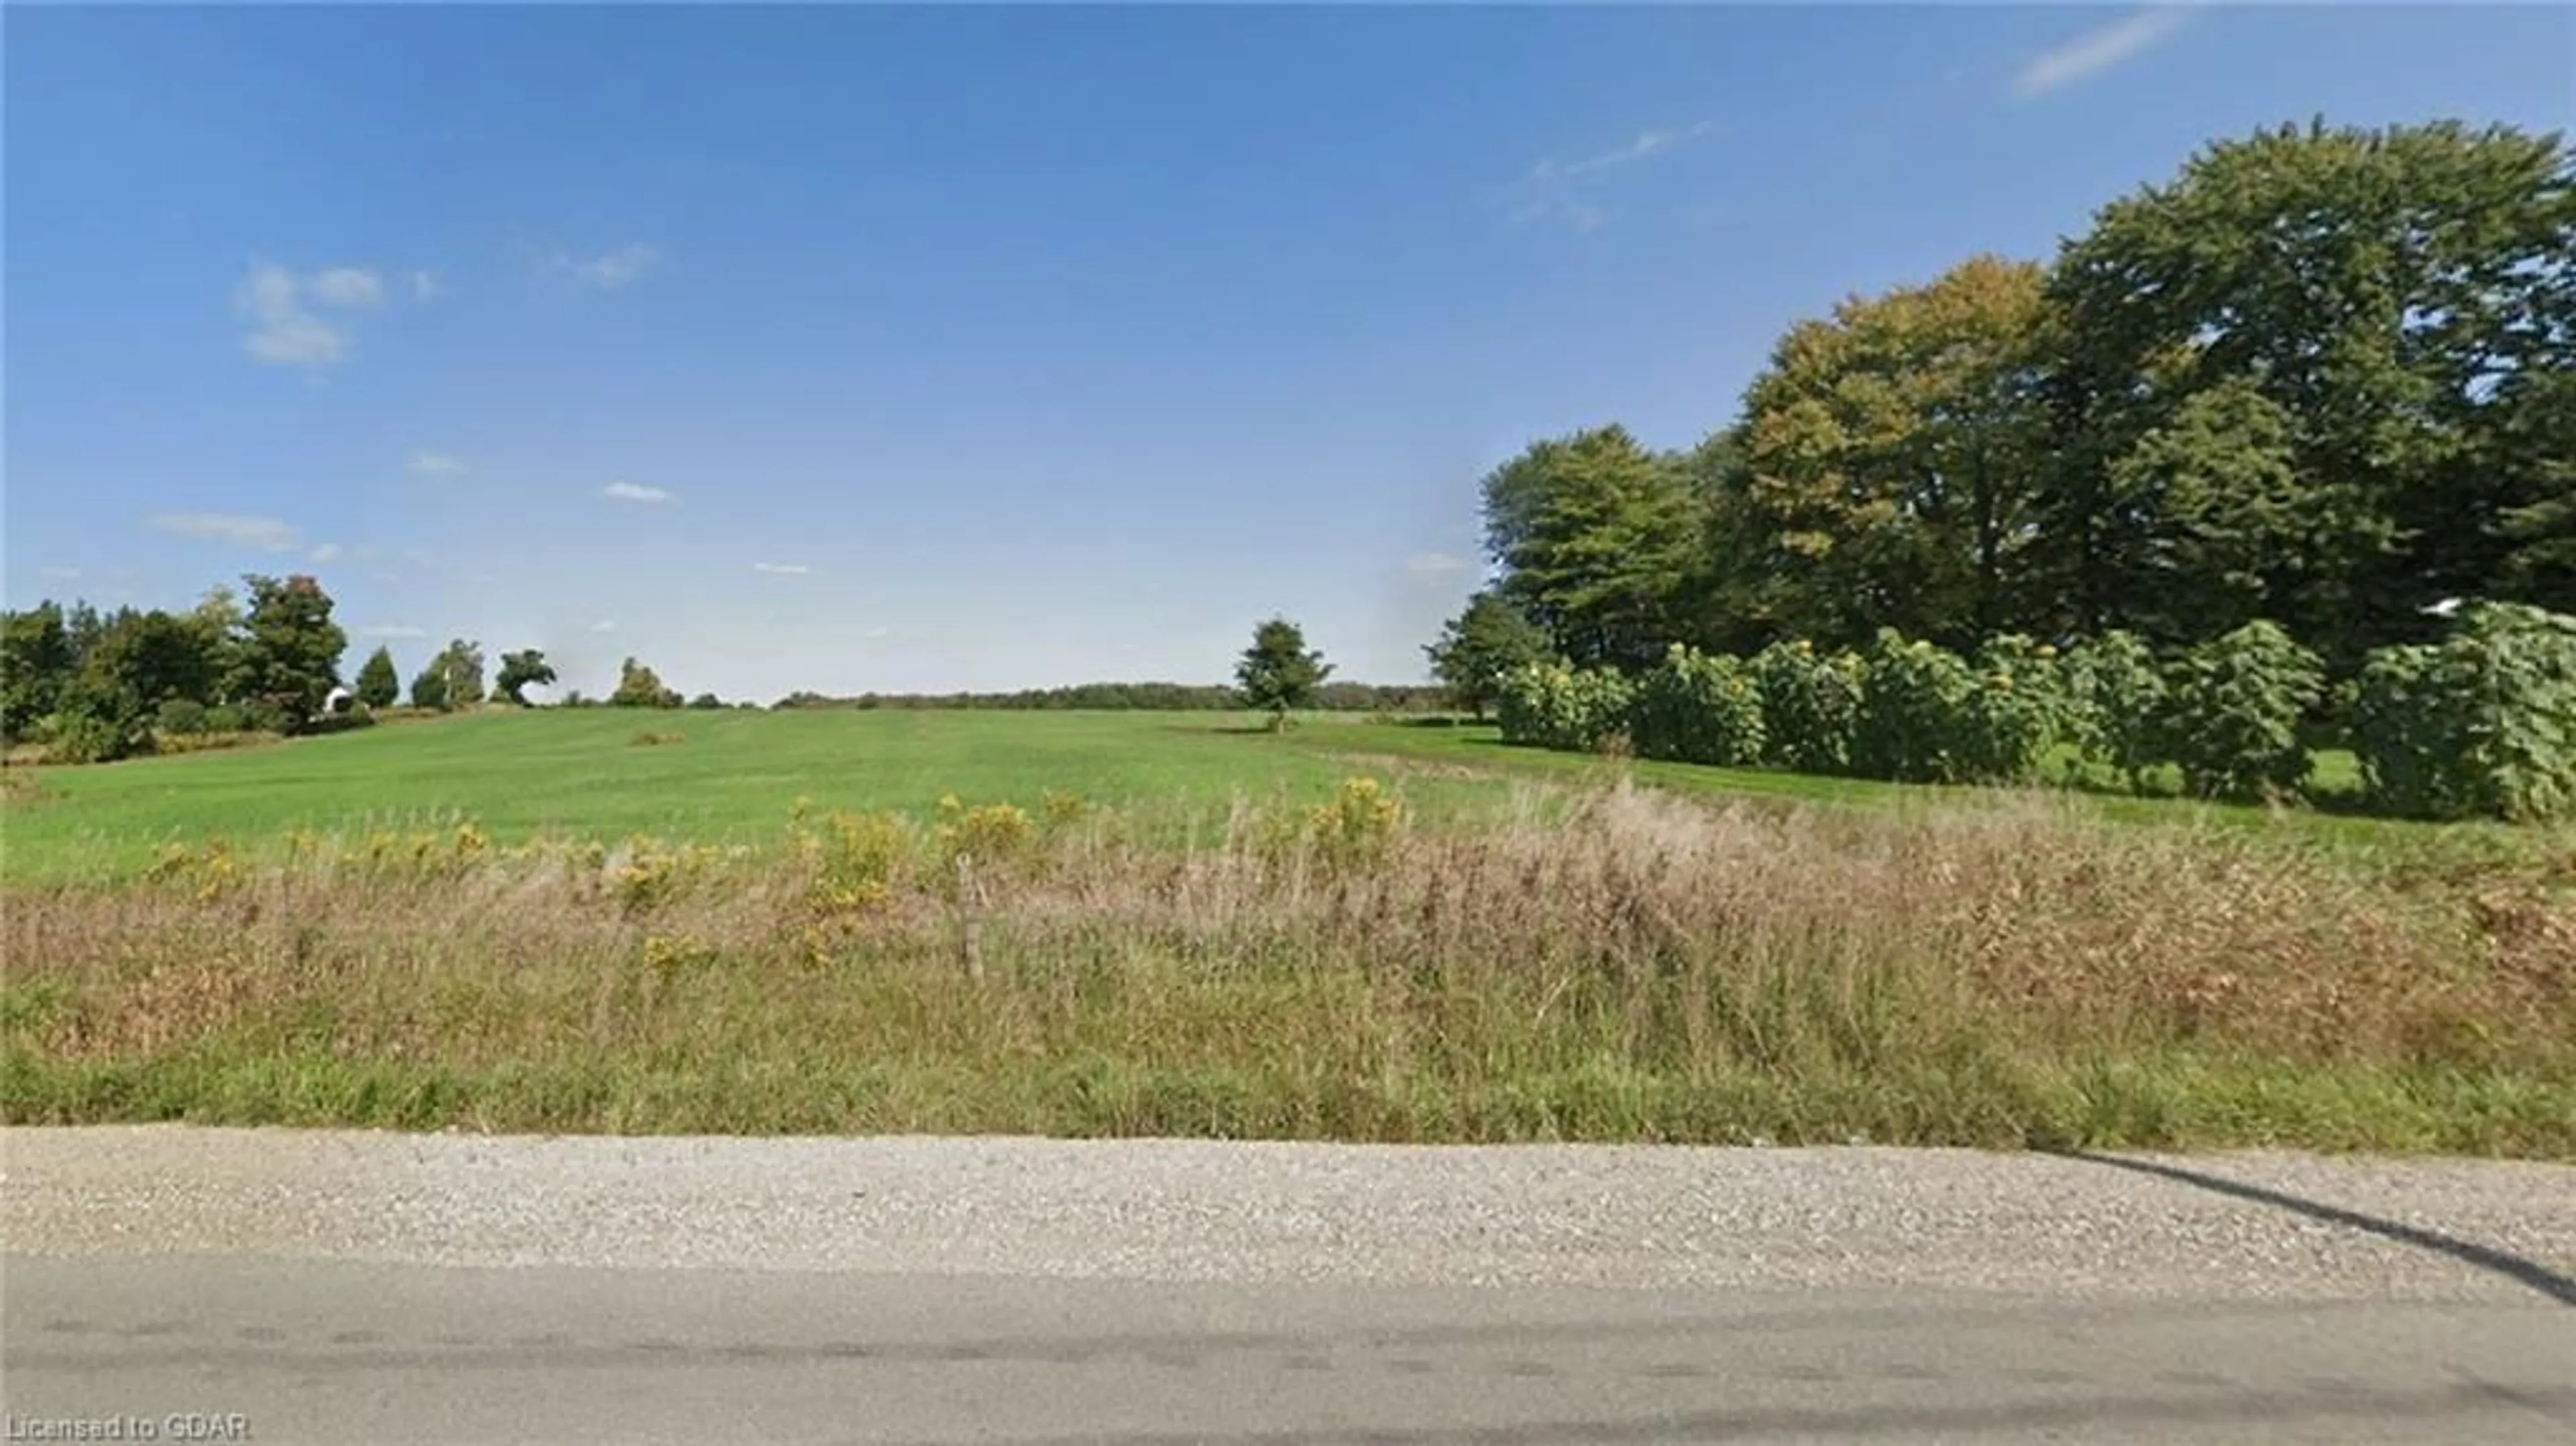 Street view for 5287 Woolwich-Guelph Tline, Guelph Ontario N1H 6J2